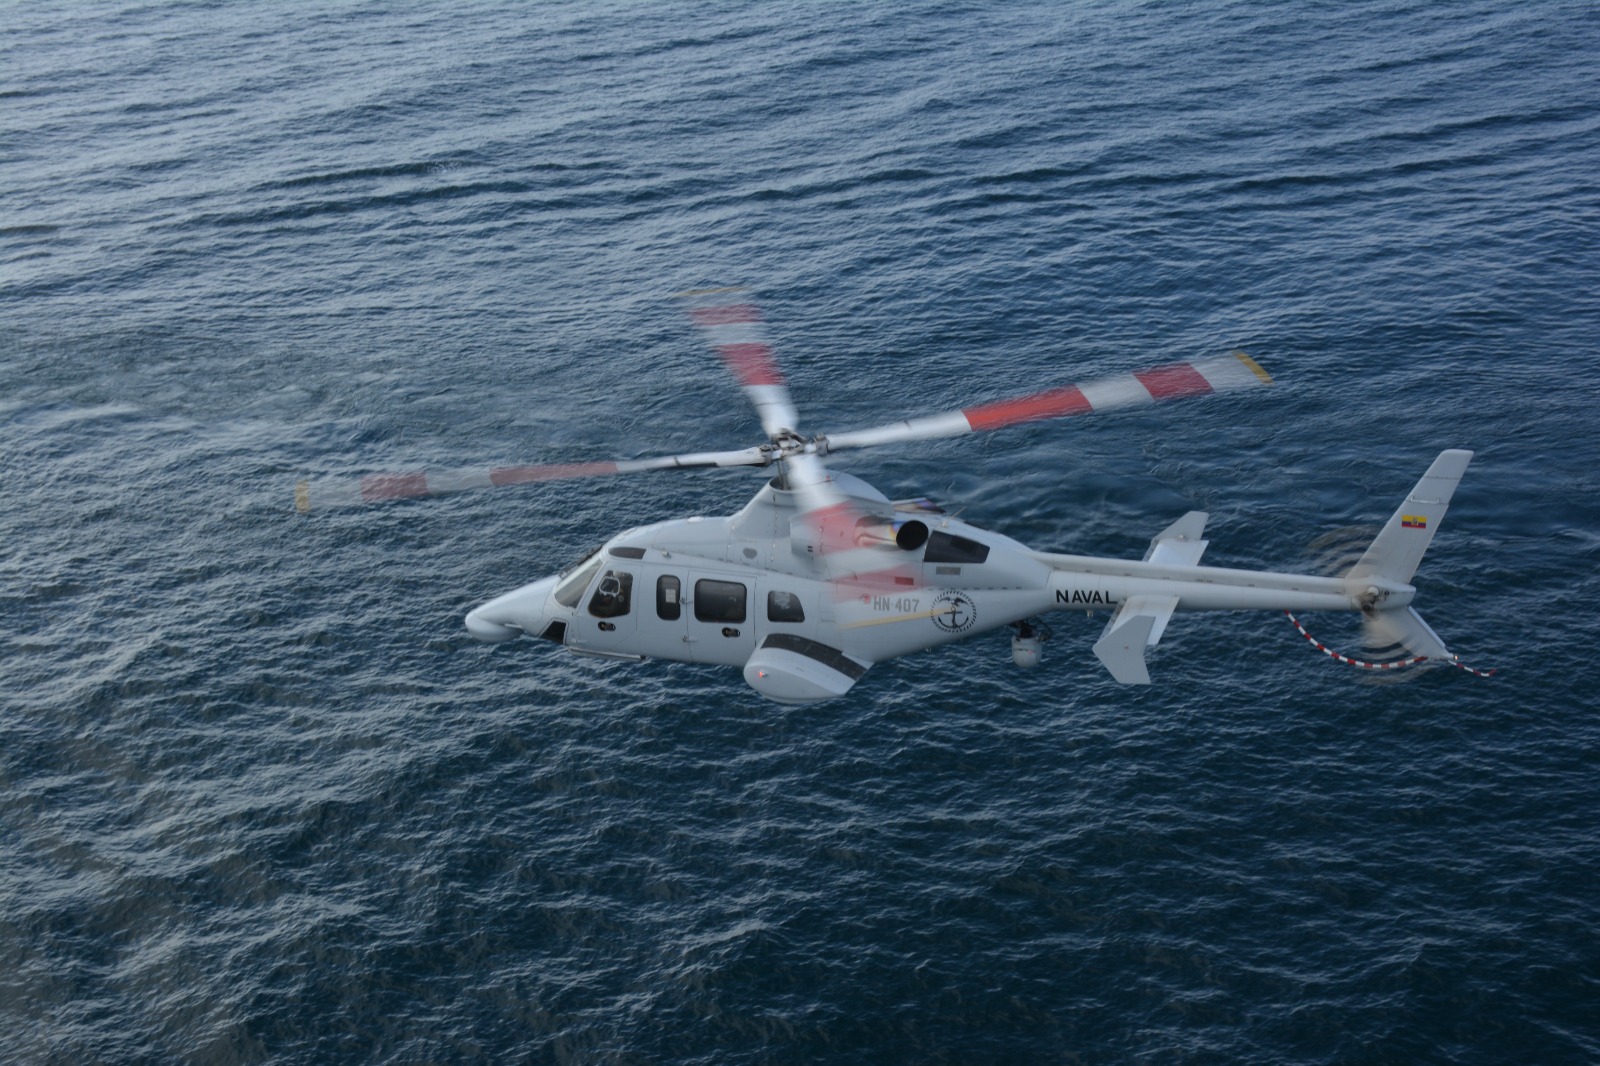 Ecuador grounds five Bell-430 helicopters operated by the Ecuadorian Navy until technical evaluations are carried out.